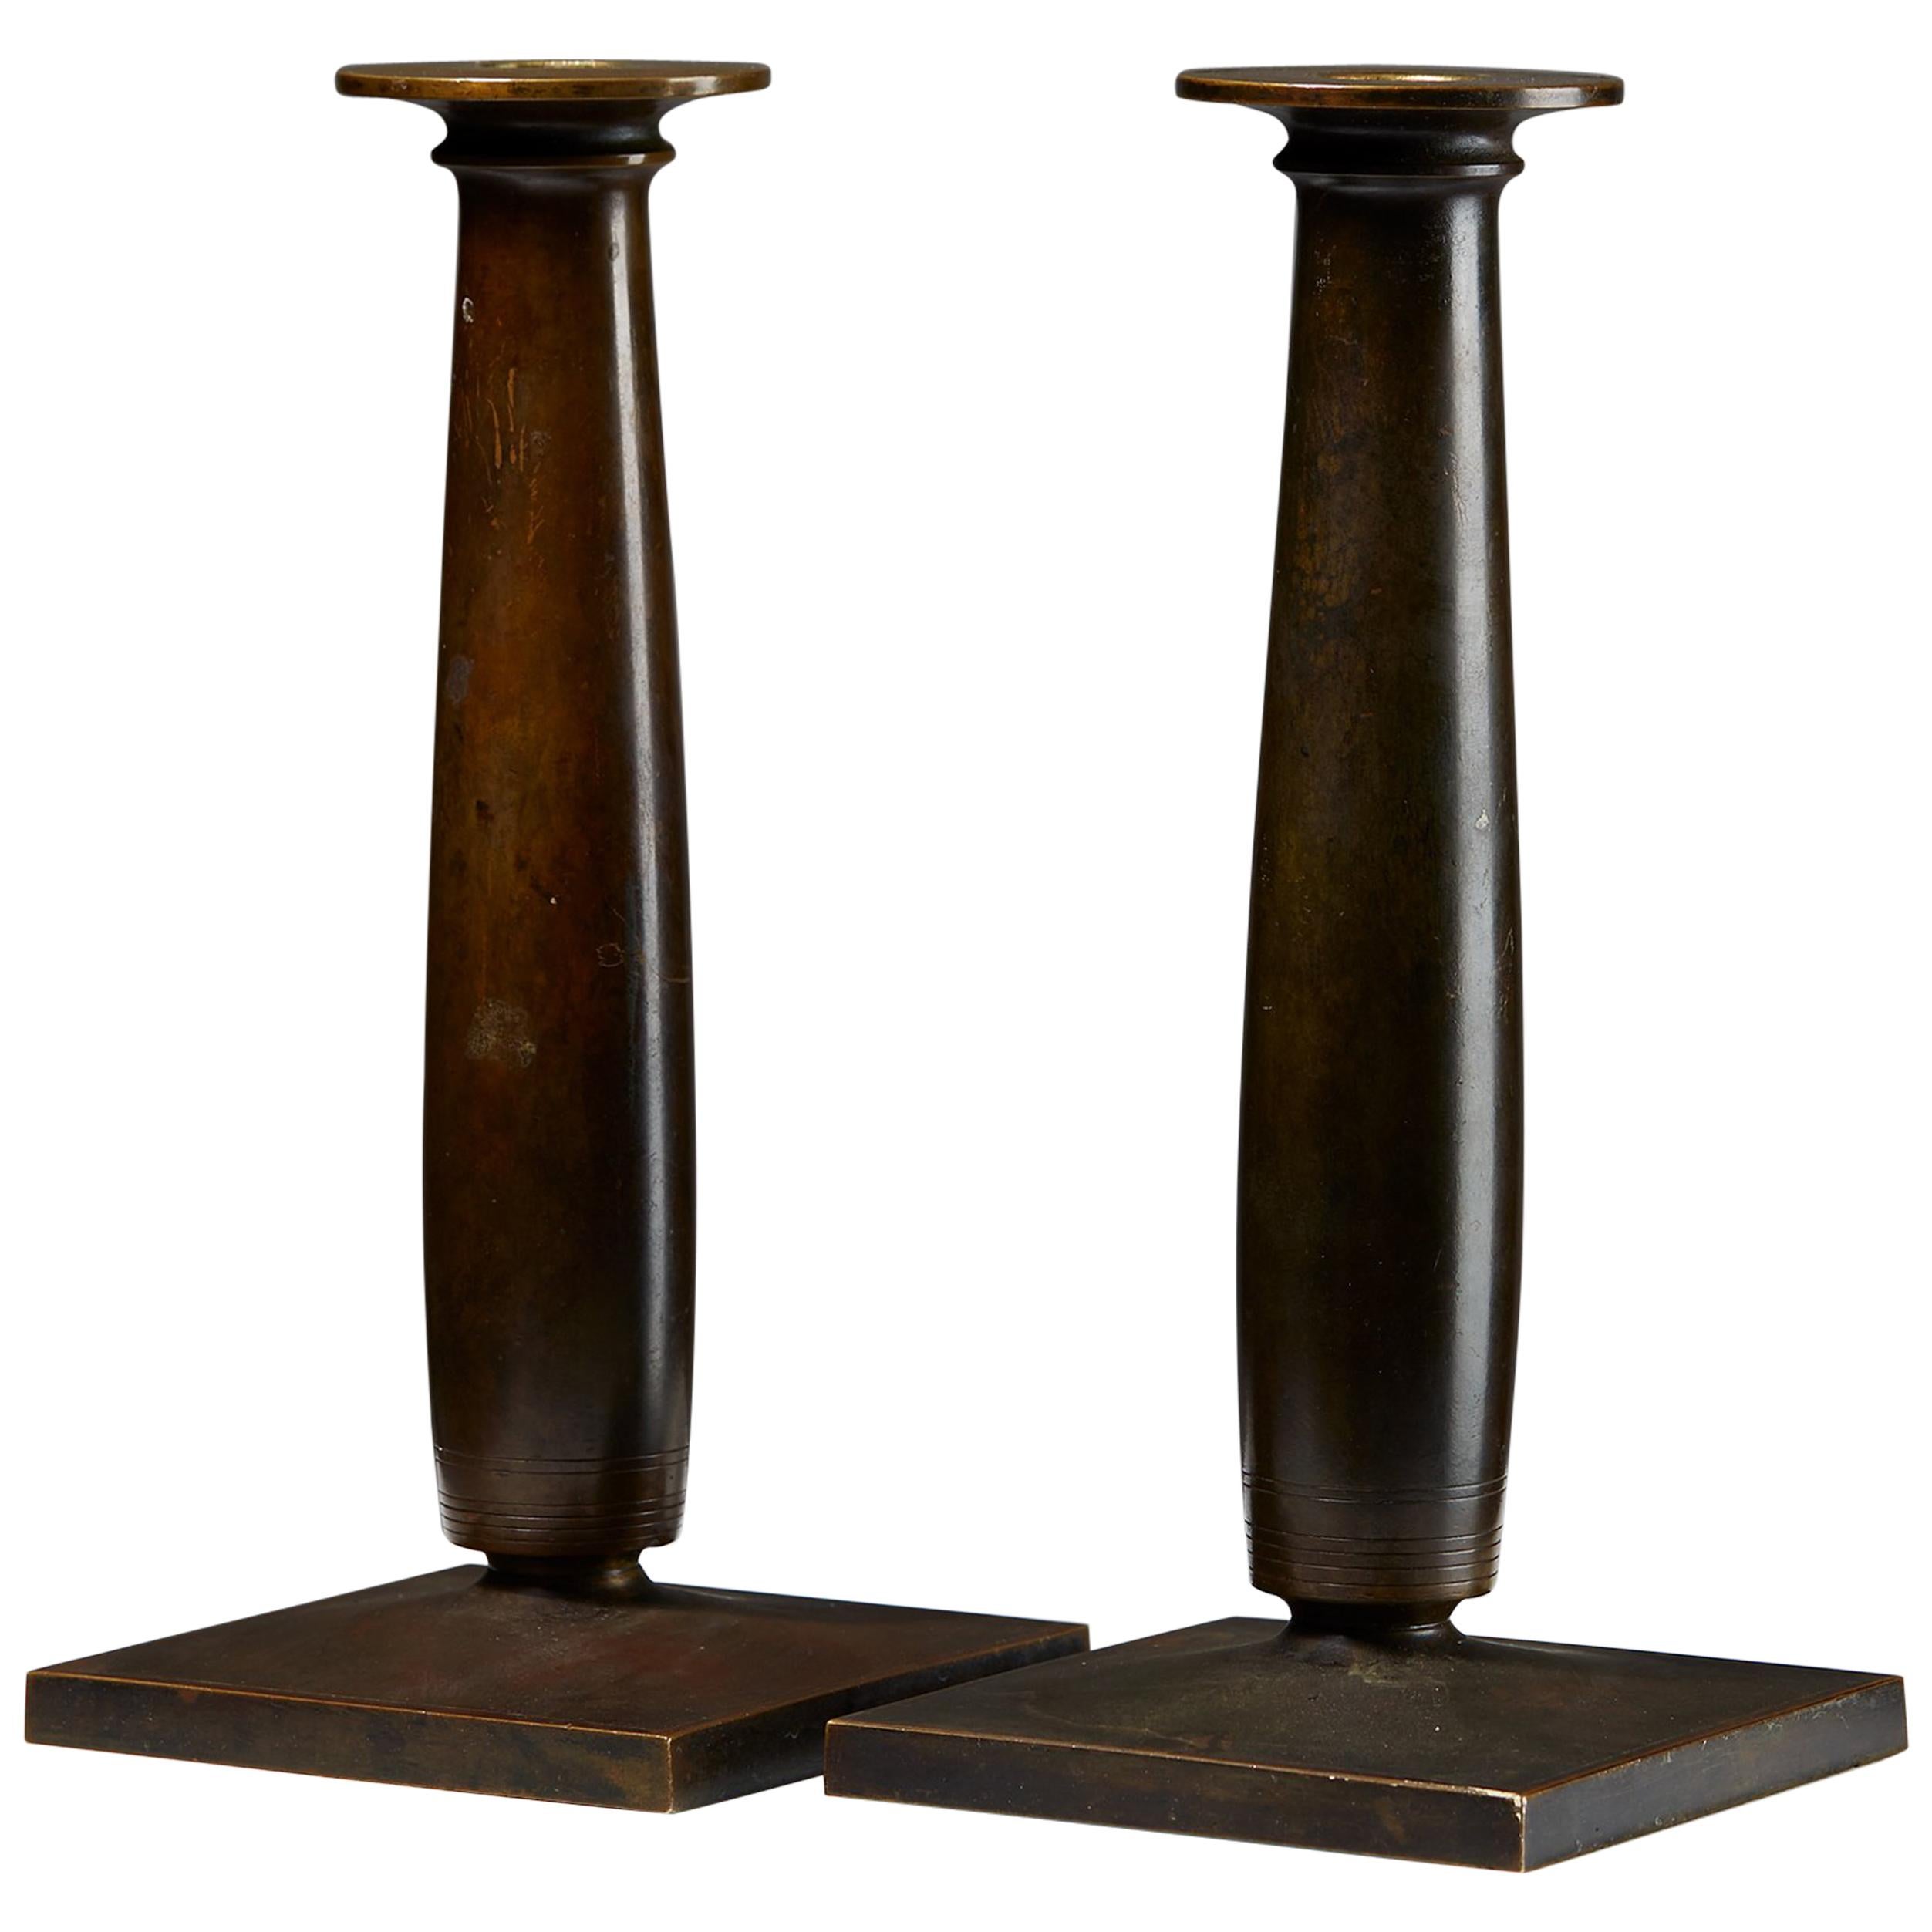 Pair of Bronze Candle Holders Designed by Just Andersen, Denmark. 1920s